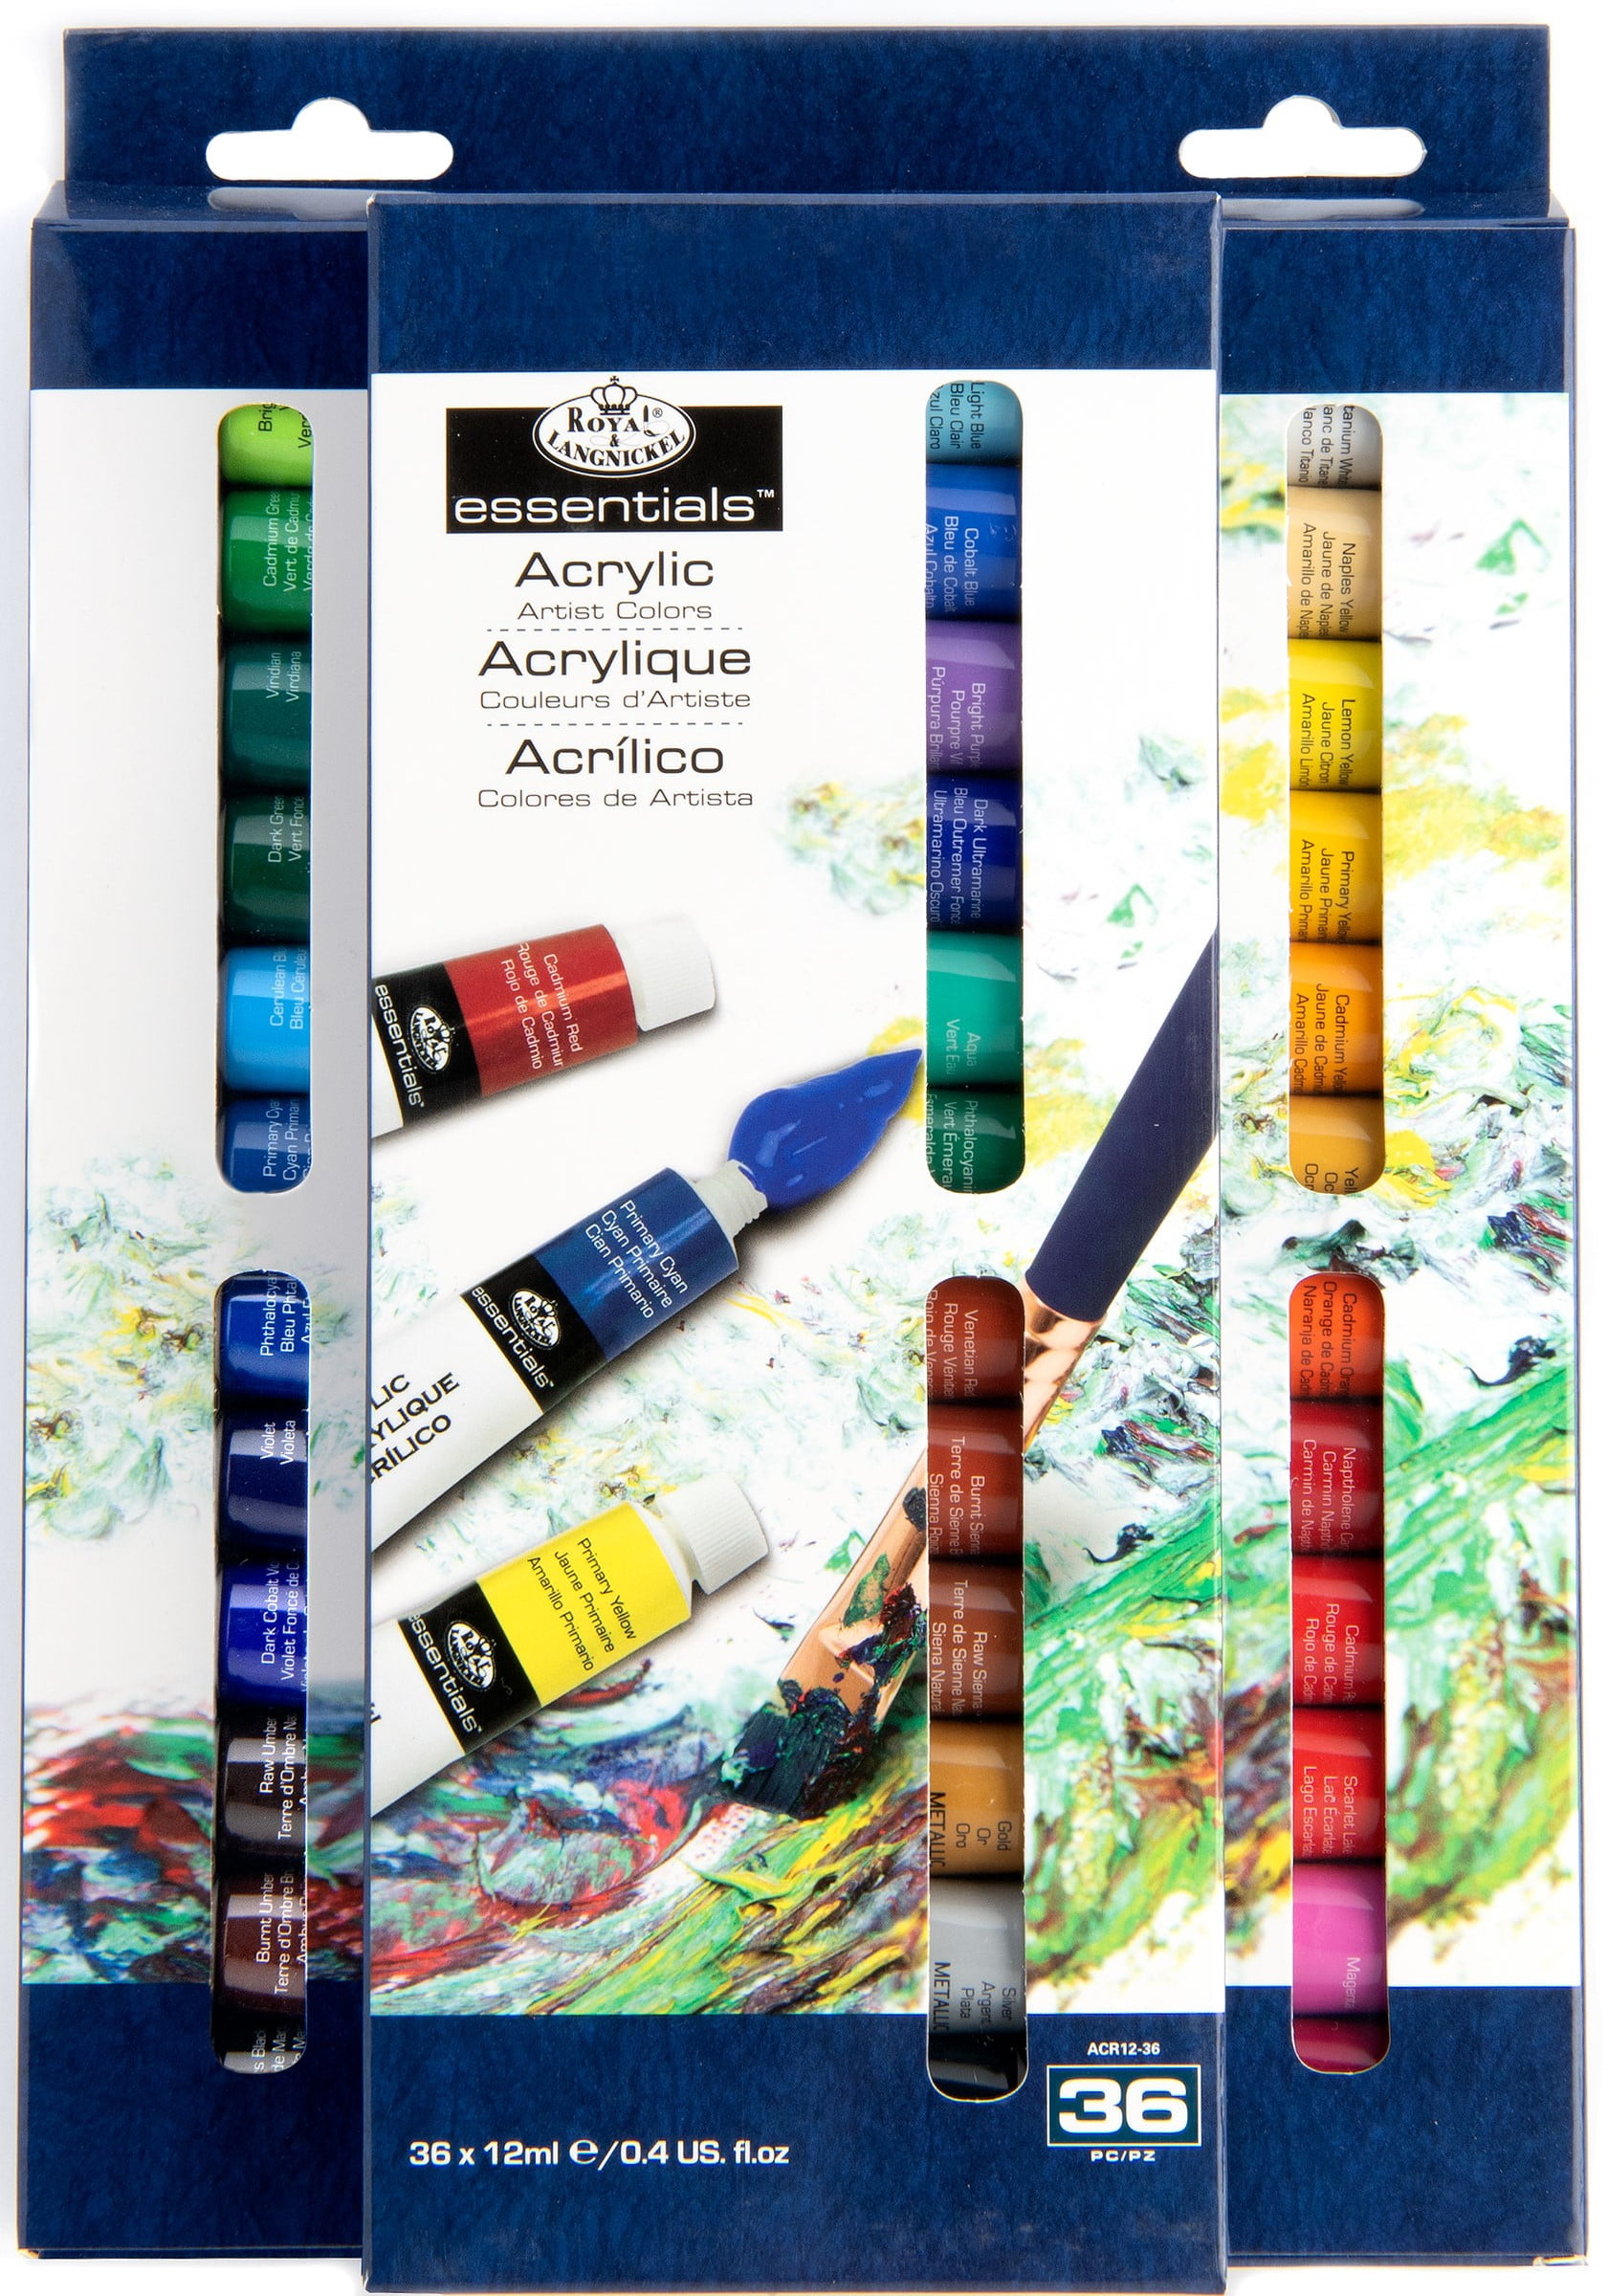 Acrylic Paint Set with 12 Art Brushes, 36 Colors (2 oz/Bottle) Acrylic Paint  for Painting Canvas, Wood, Ceramic and Fabric, Paint Set for Beginners,  Students and Professional Artist, Rich Pigments 